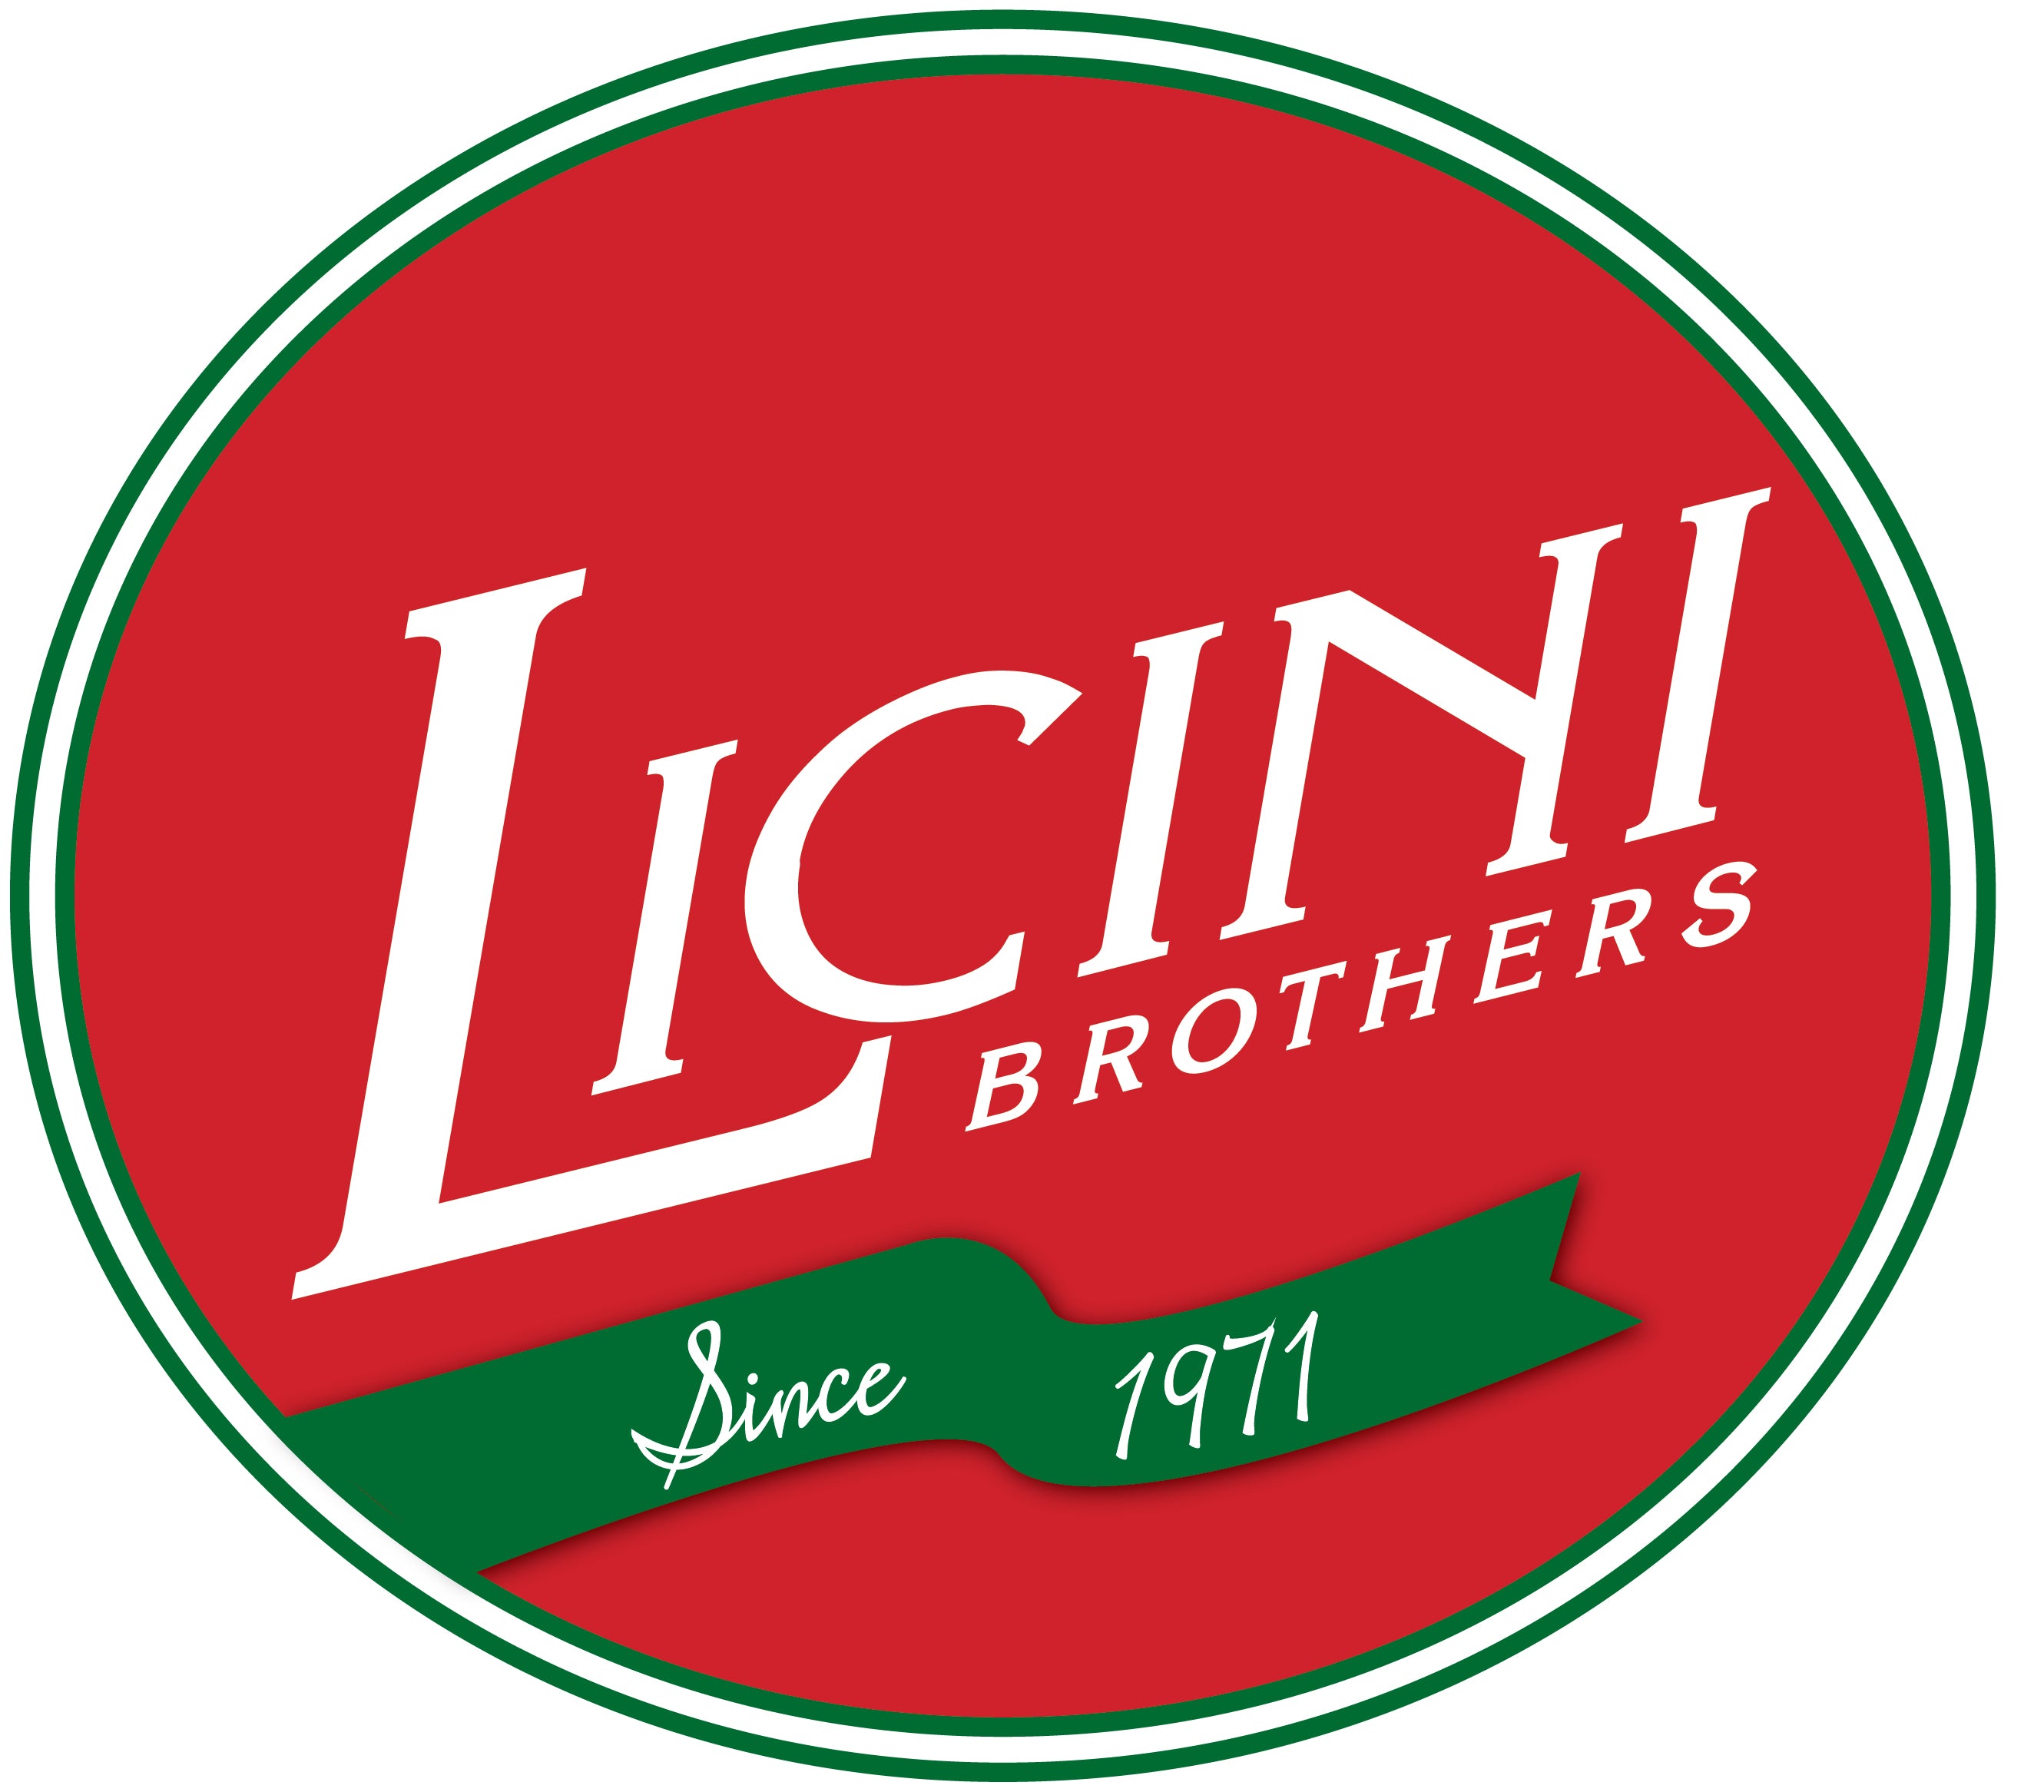 licinibrothers